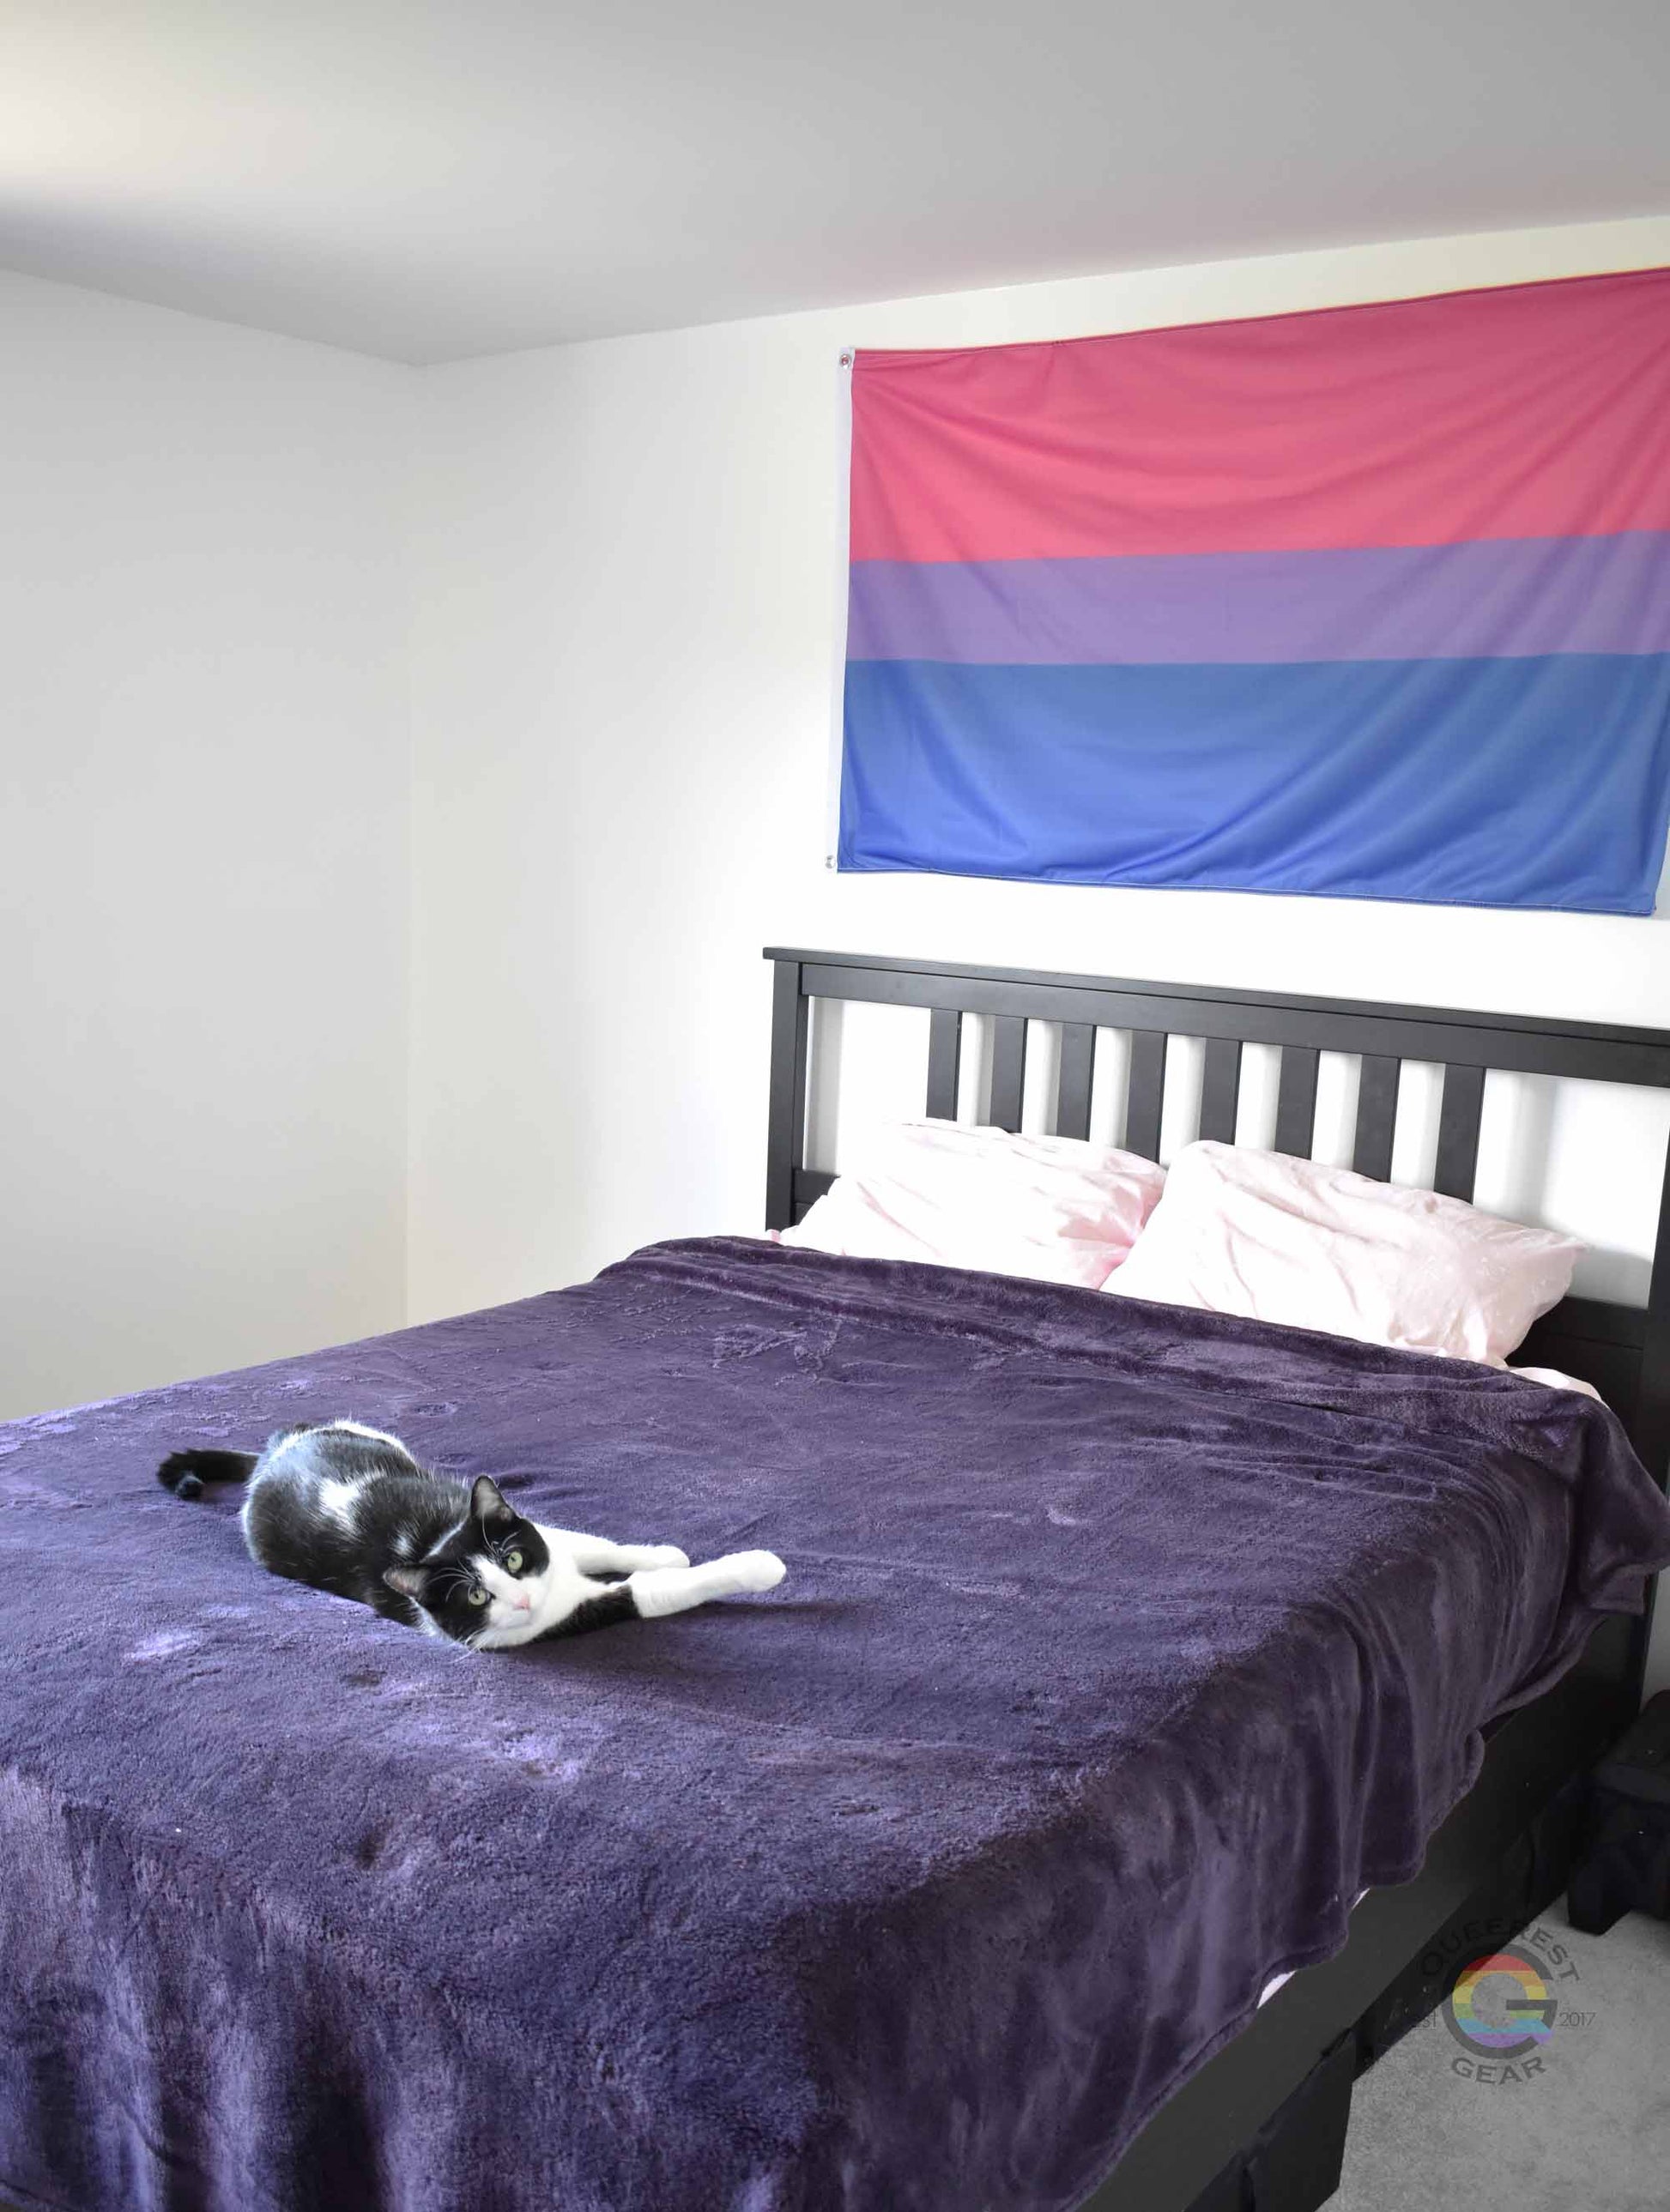 3’x5’ bisexual pride flag hanging horizontally on the wall of a bedroom centered above a bed with a purple blanket. there is a black and white cat laying on the bed